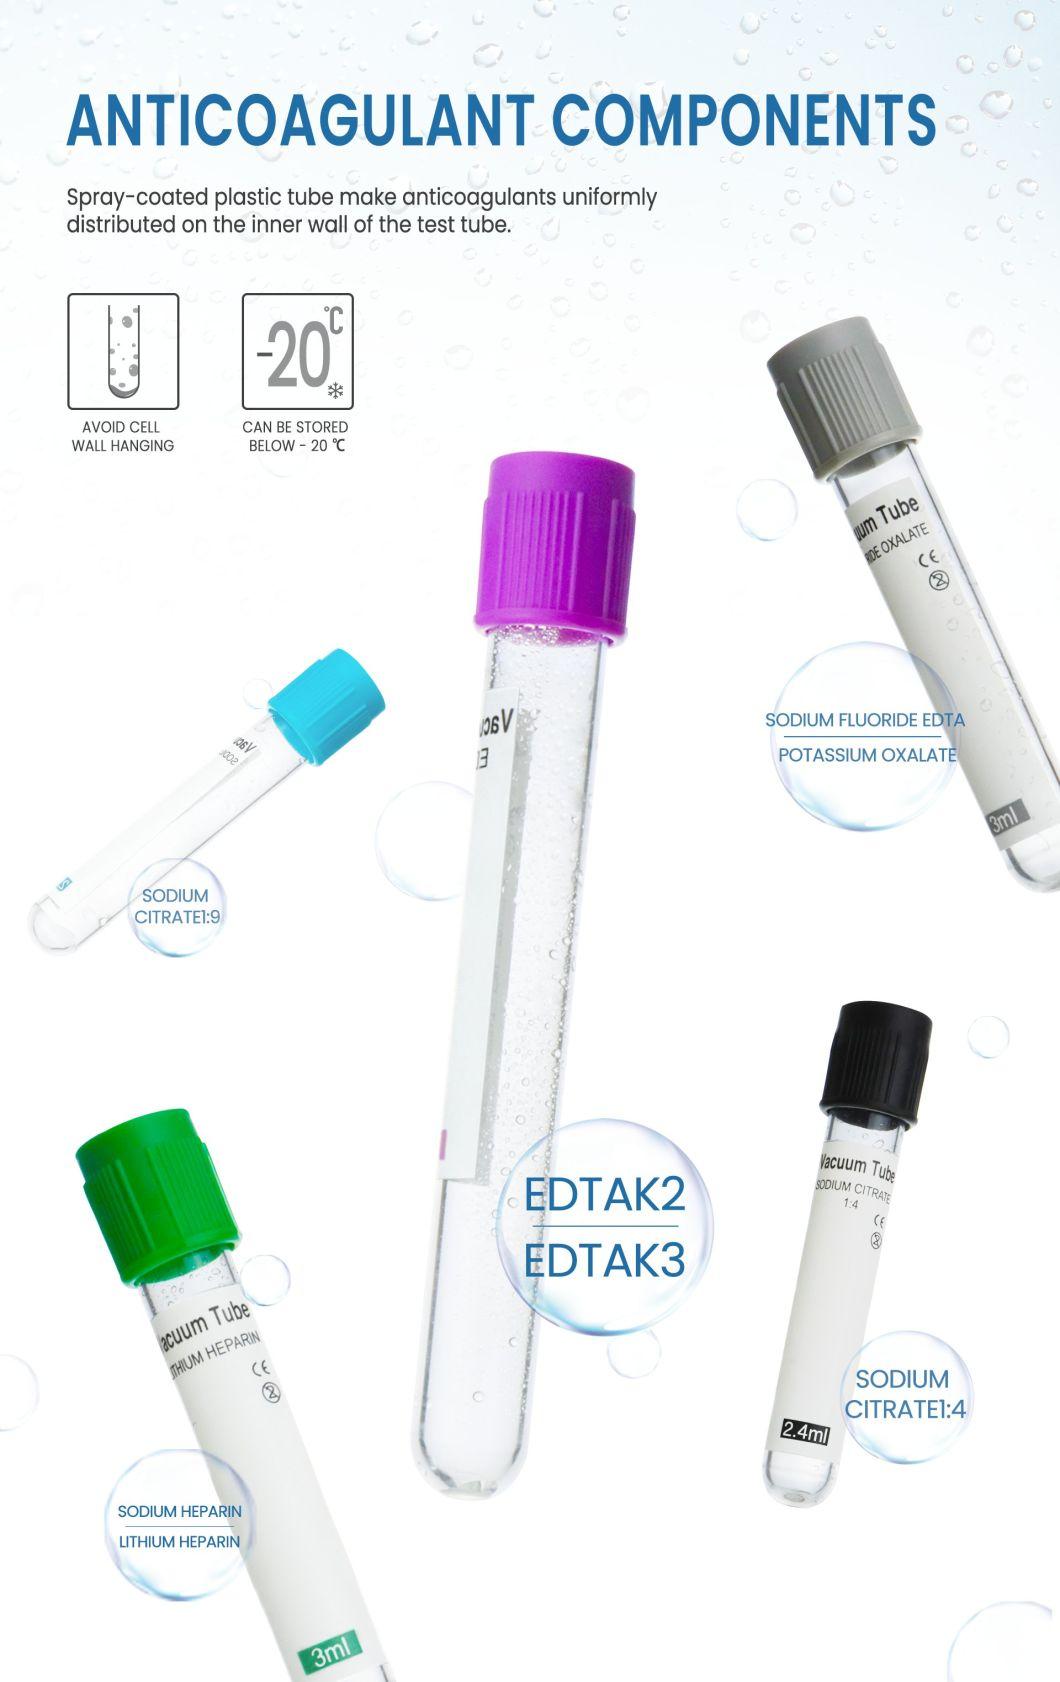 Disposable Vacuum Blood Collection Tube Medical Non Vacuum Blood Test Tubes